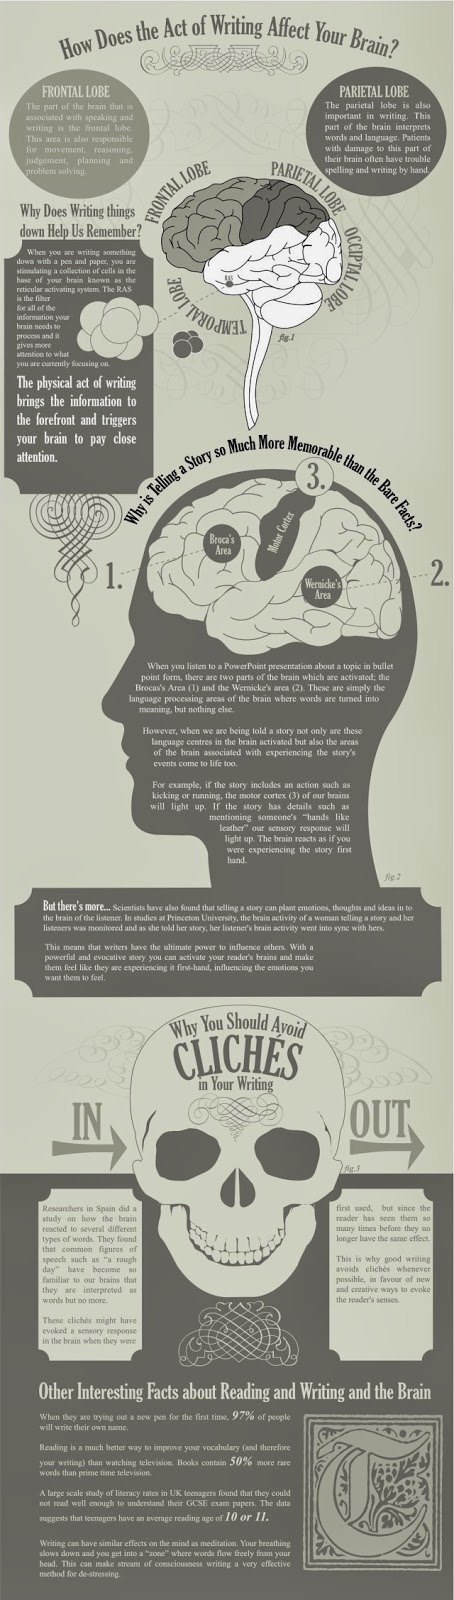 How does the act of writing affect your brain